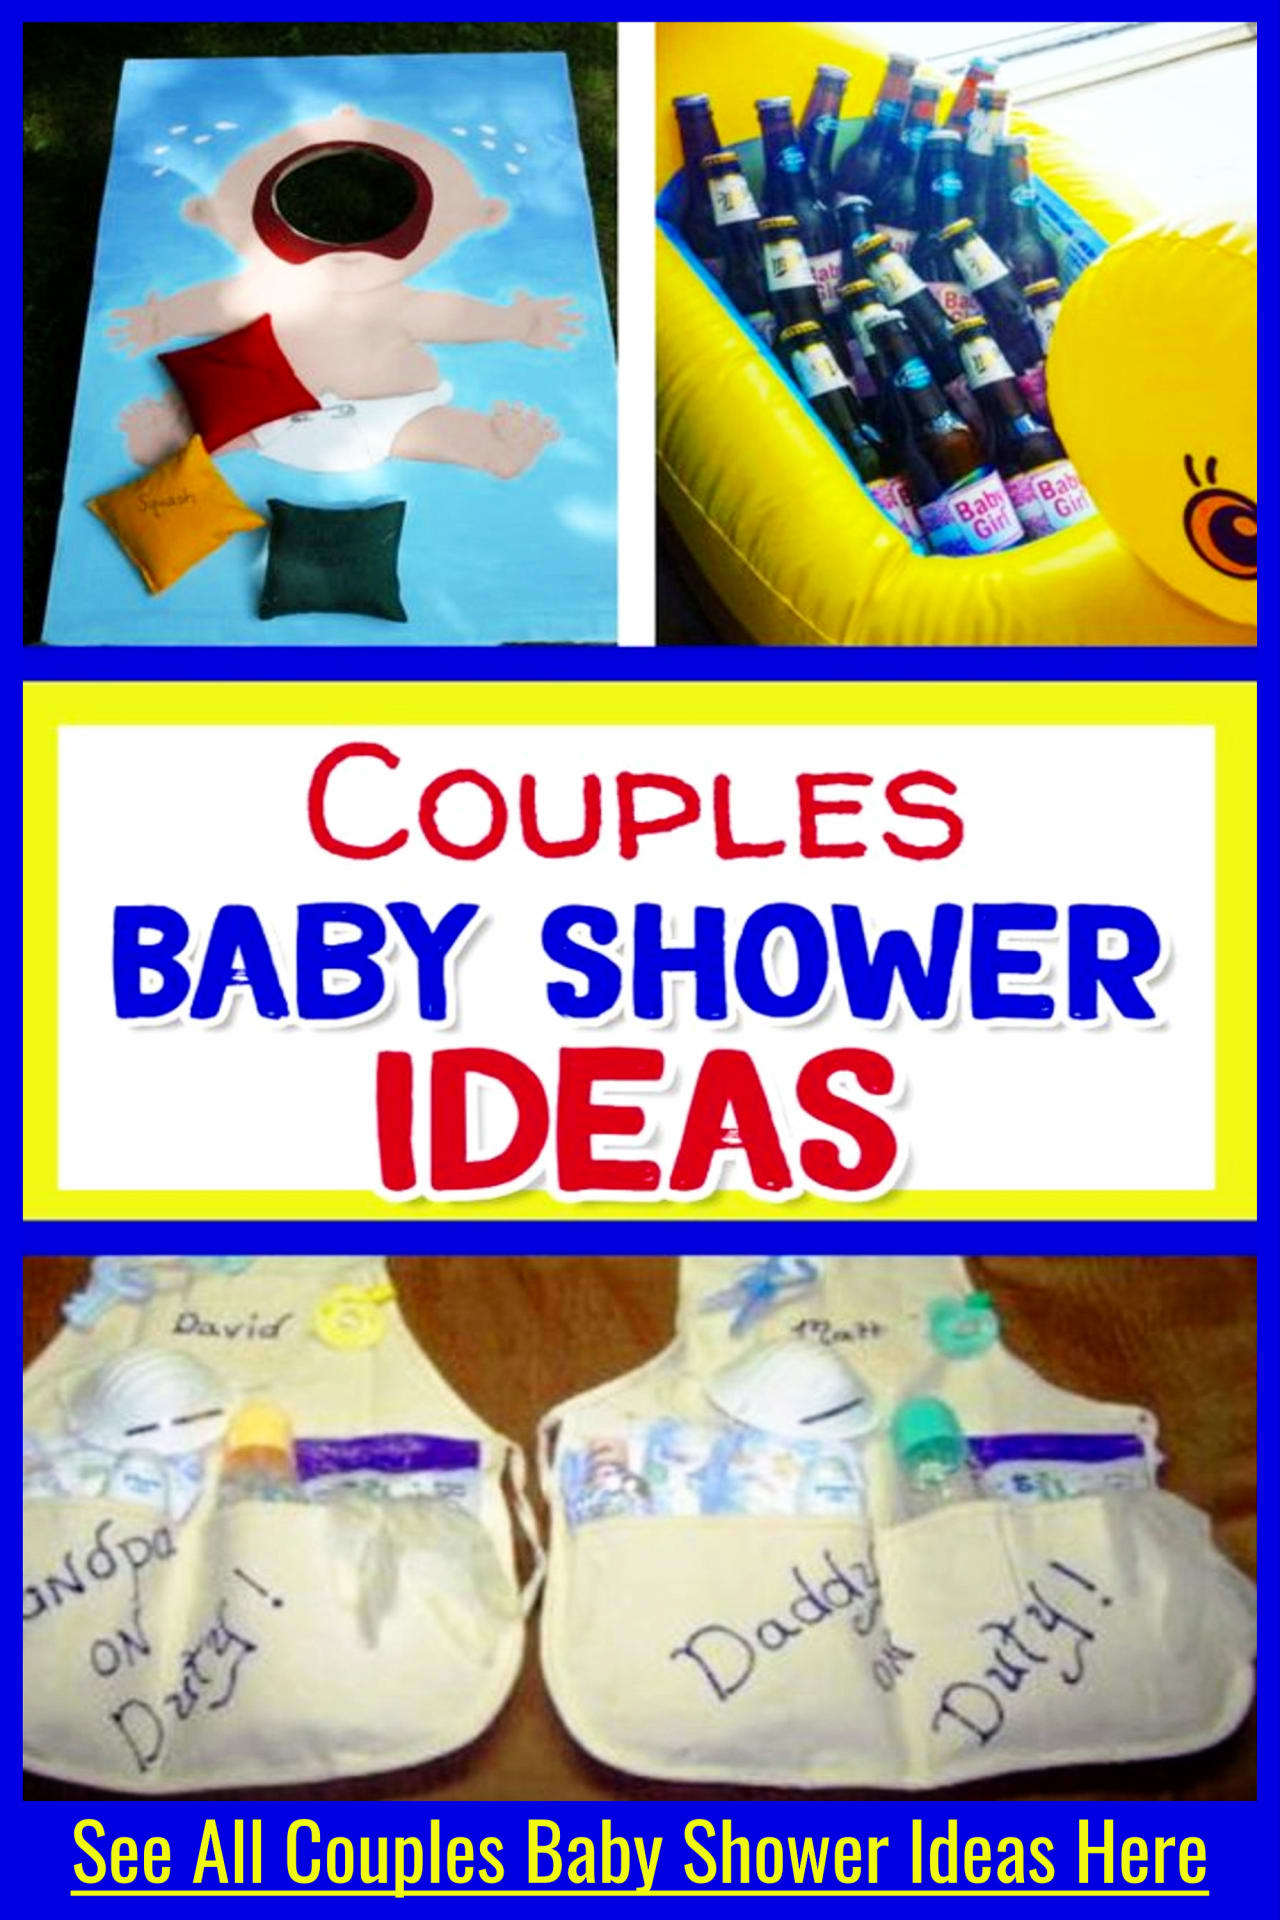 Couples baby shower ideas - baby shower gifts on a budget and cheap coed couples baby shower decorations, games, food ideas and more